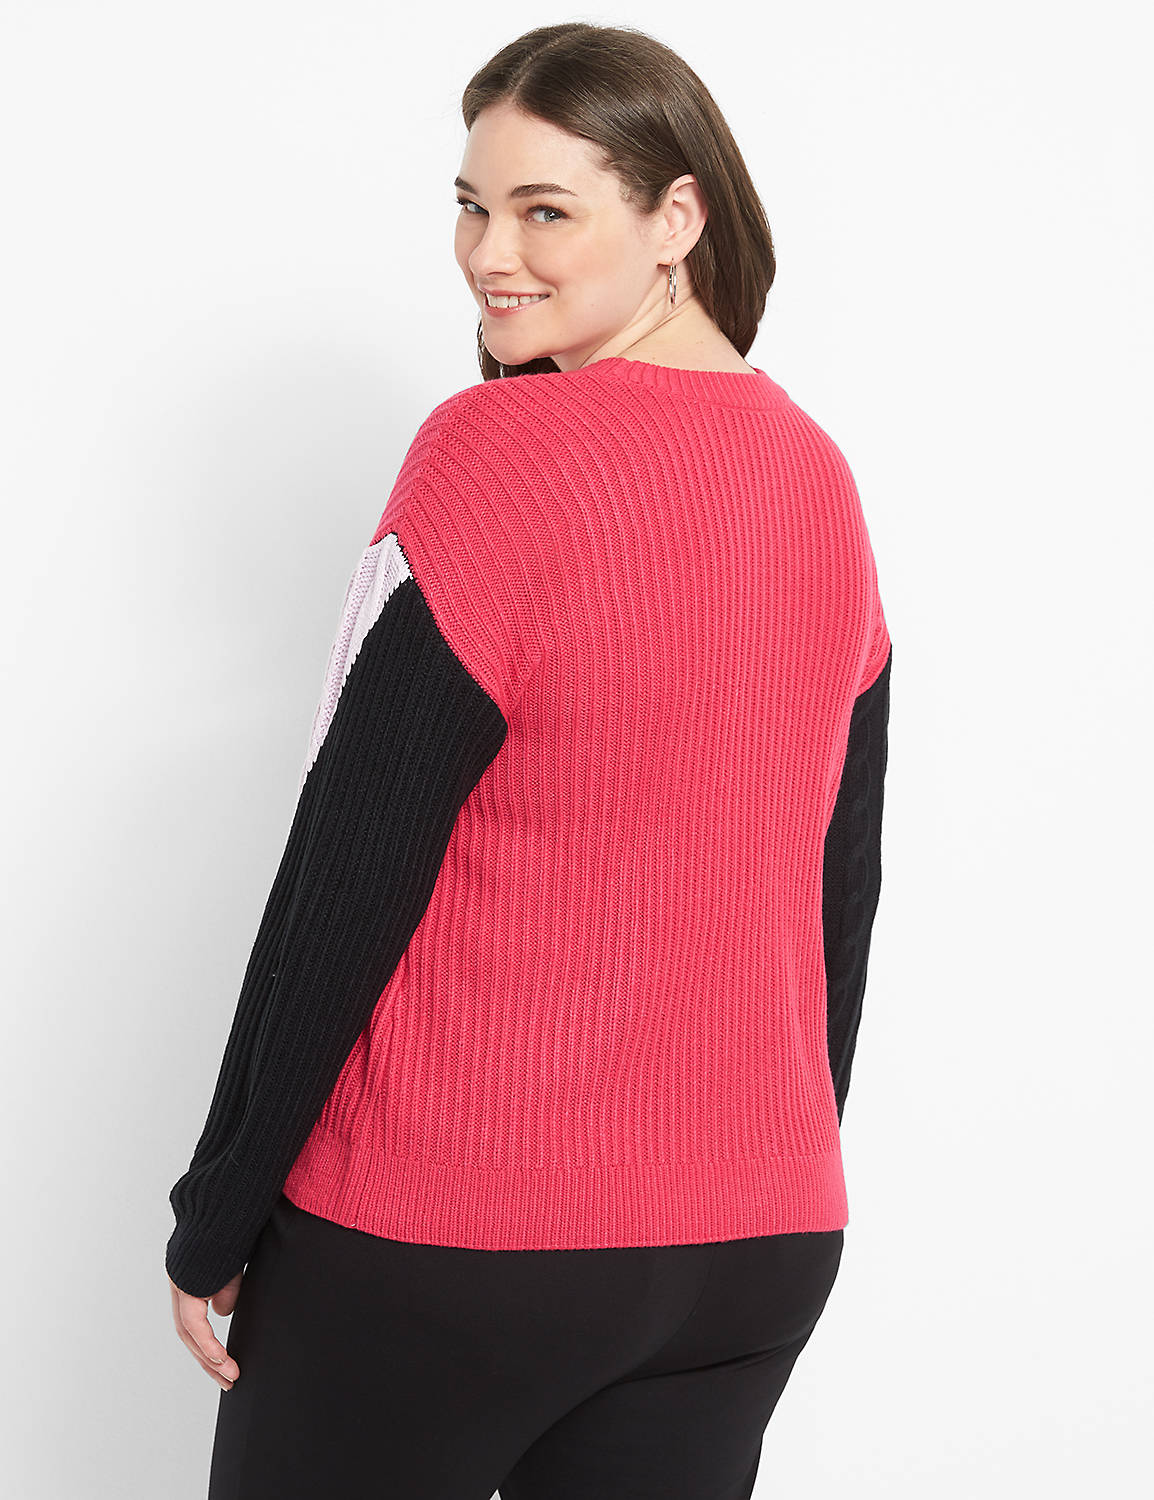 Long Sleeve Crew Neck Colorblock Pullover 1124142:PANTONE Cabaret:10/12 Product Image 2